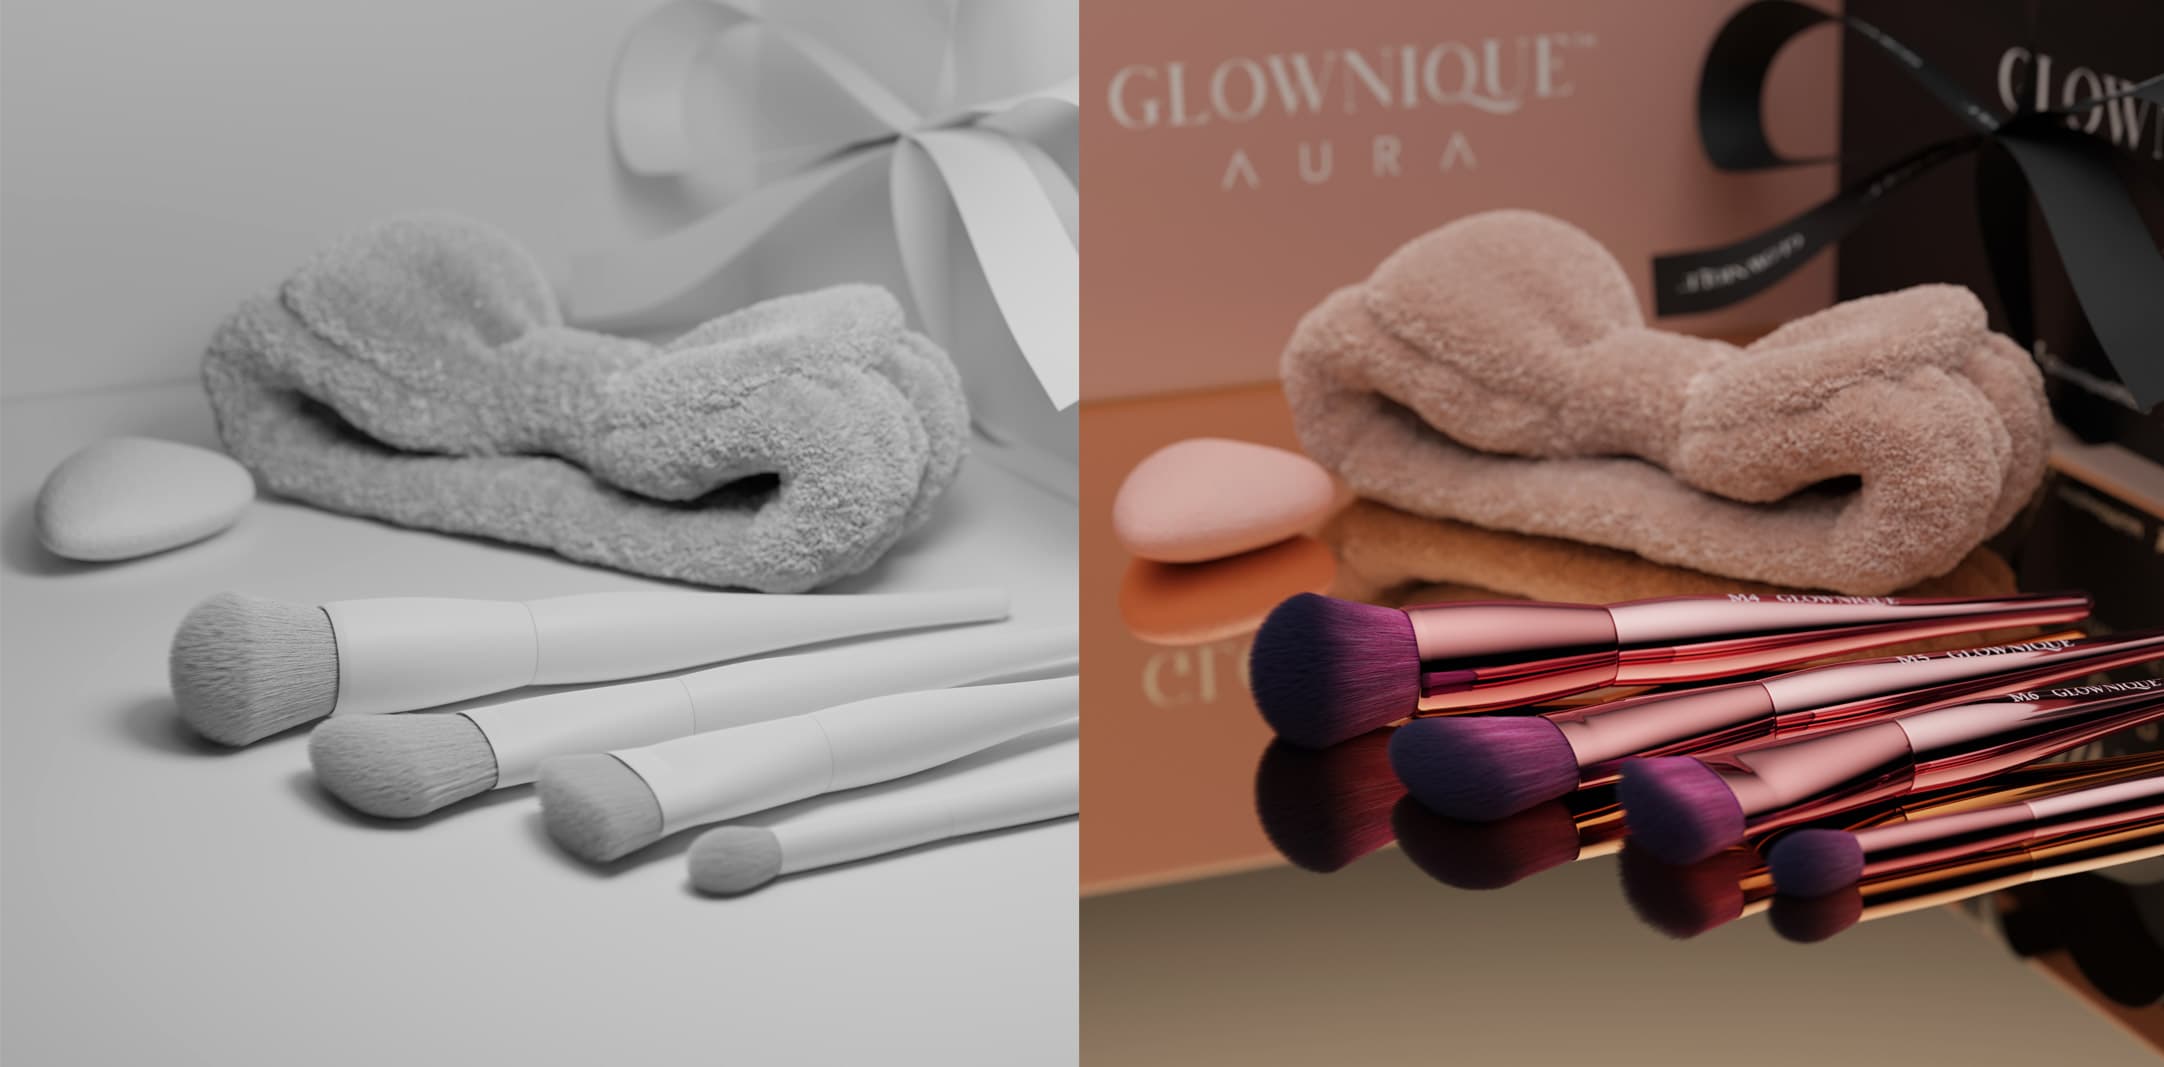 Blender 3D product rendering of makeup brushes as creative product photography p